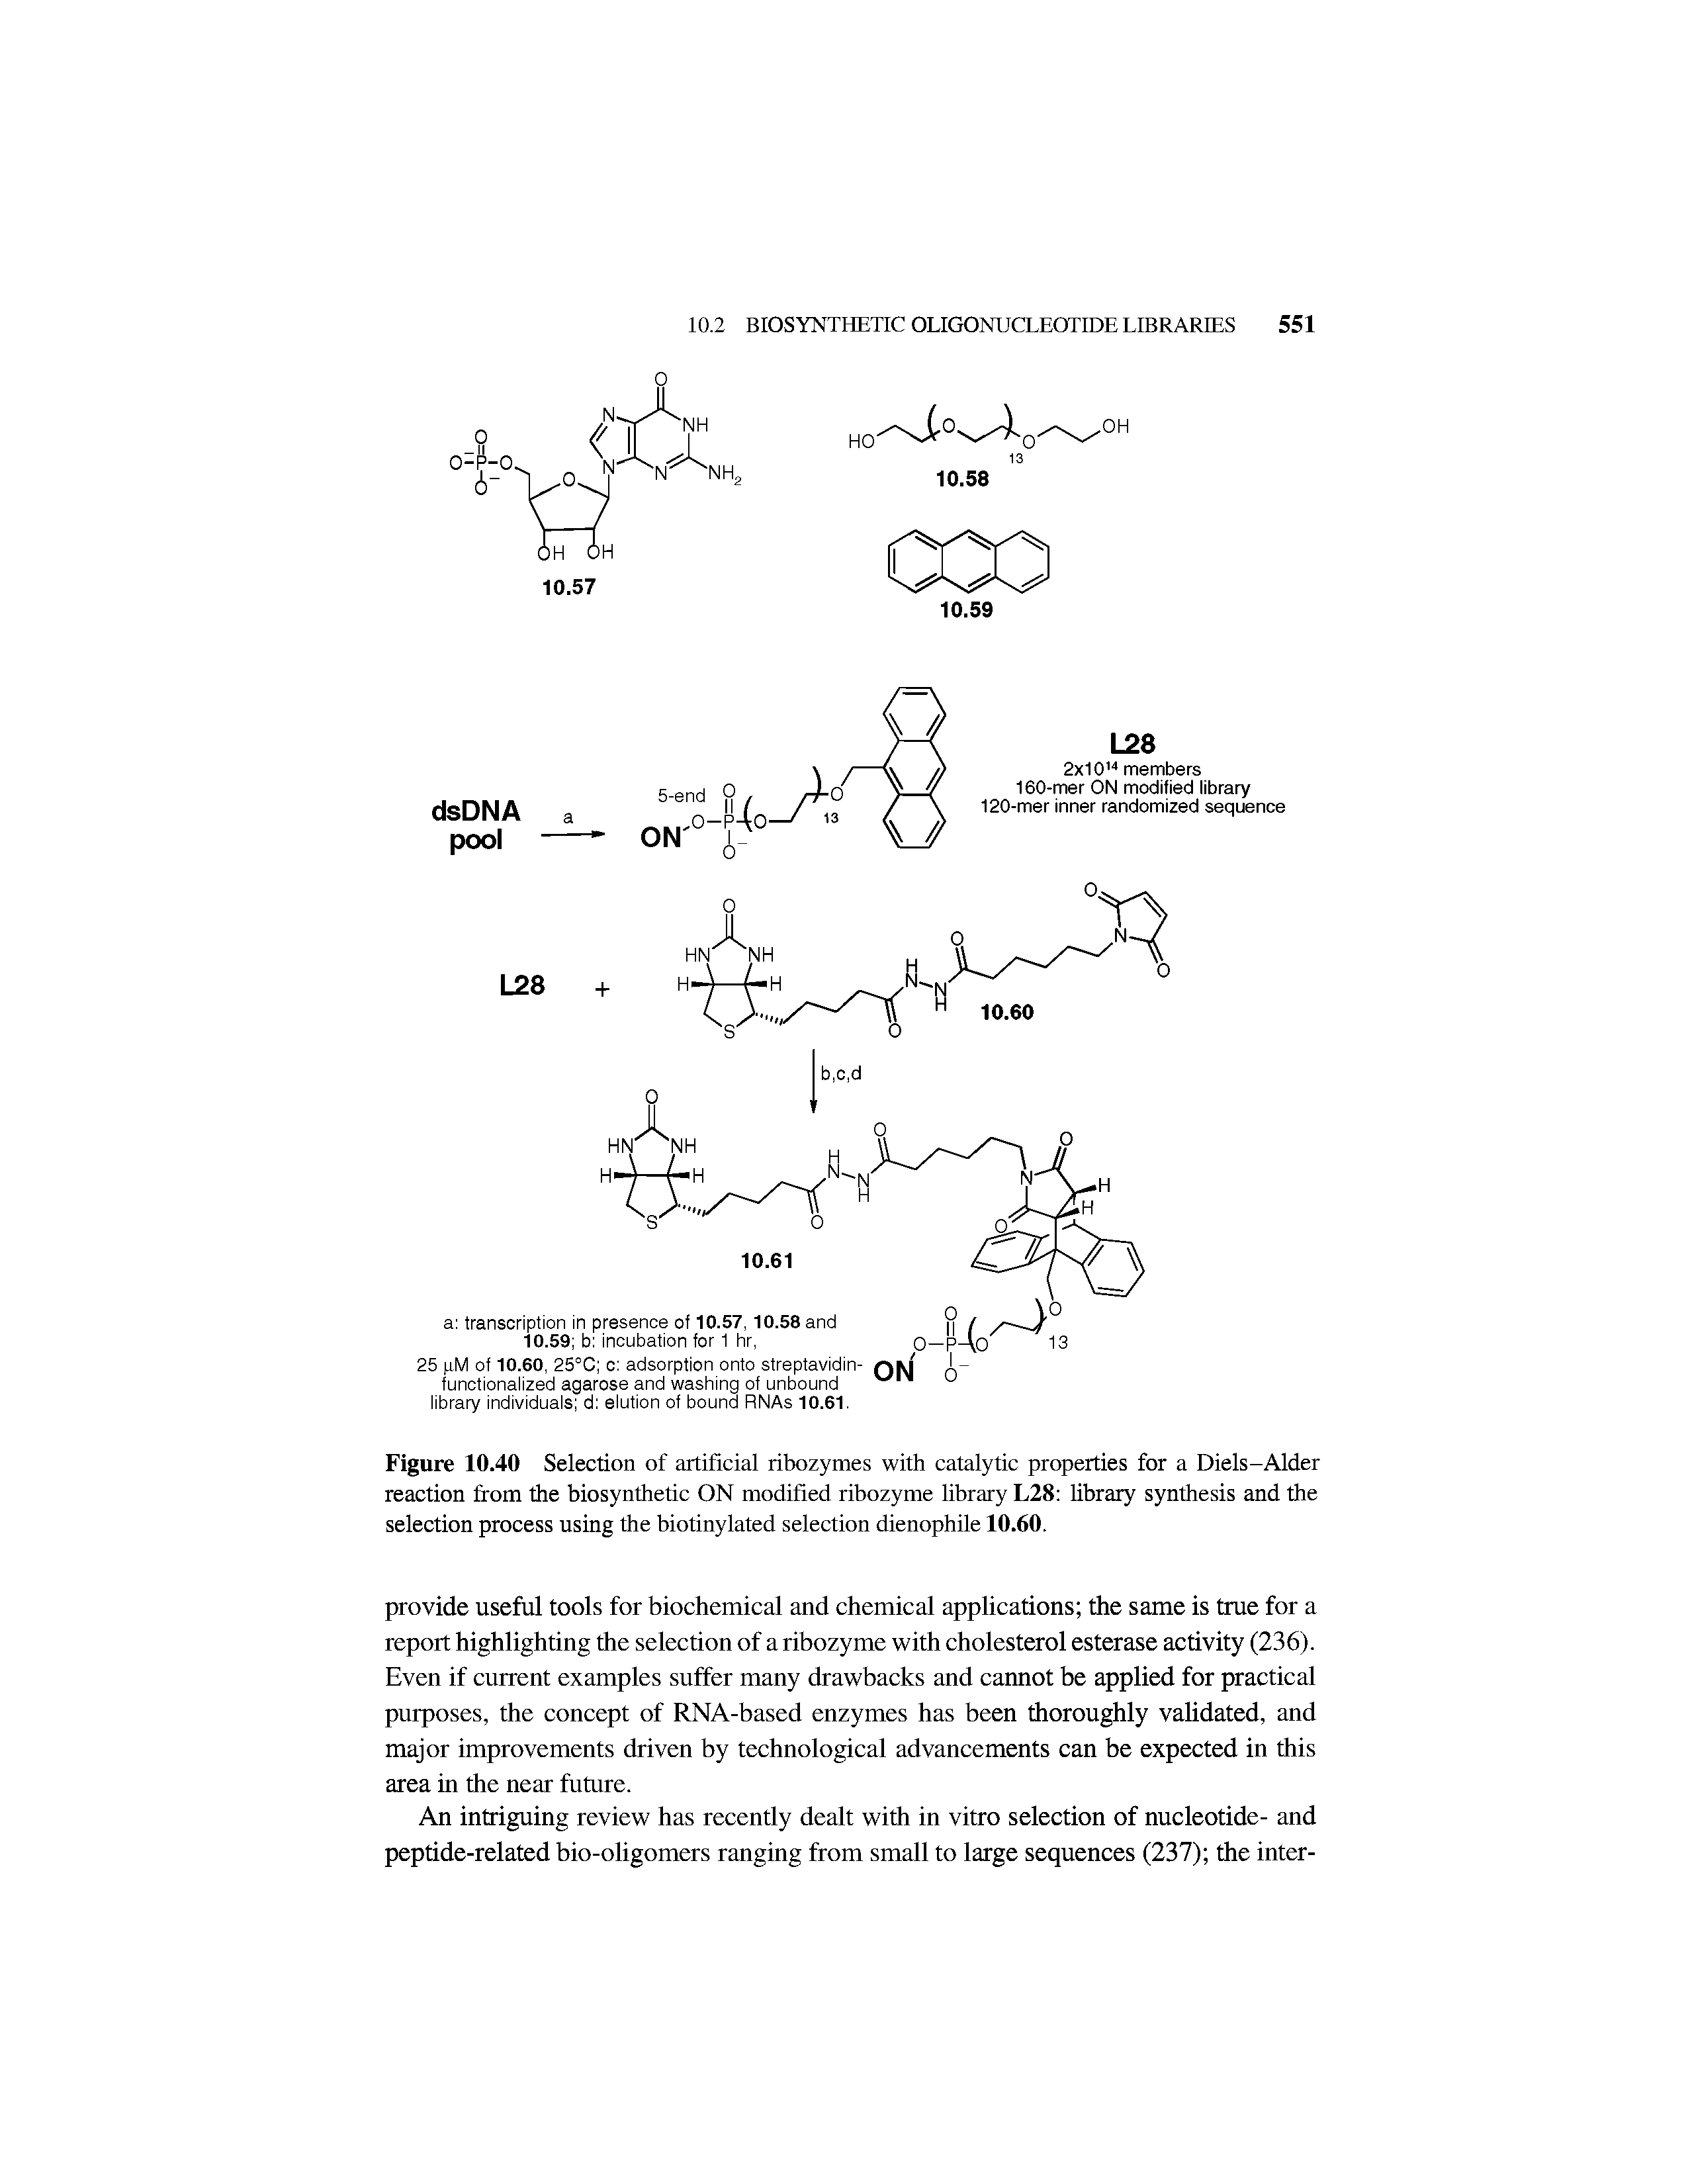 Figure 10.40 Selection of artificial ribozymes with catalytic properties for a Diels-Alder reaction from the biosynthetic ON modified ribozyme library L28 library synthesis and the selection process using the biotinylated selection dienophile 10.60.